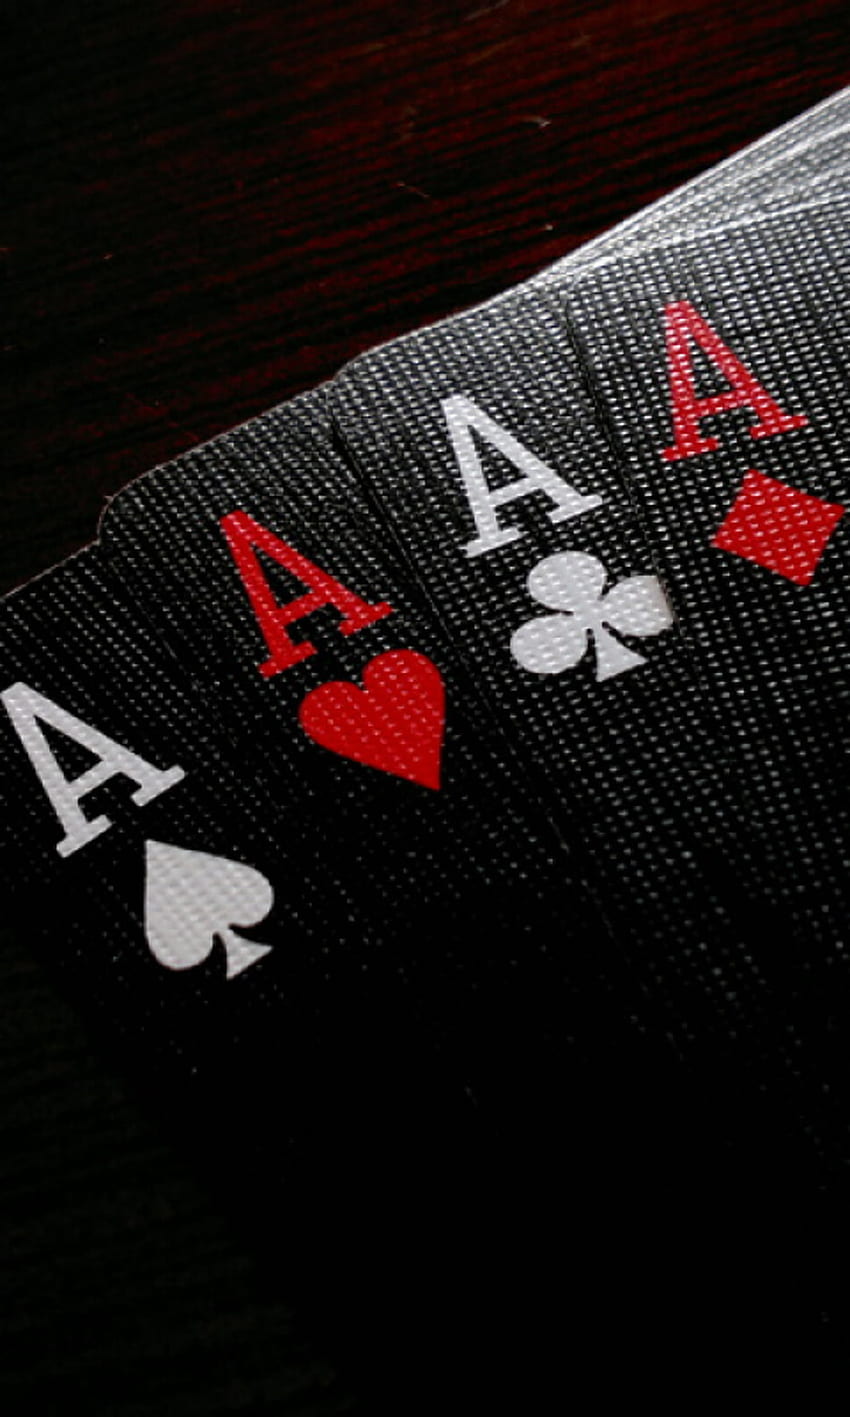 Ace Of Spade, Heart, Clubs And Diamond Playing Cards - Papel De Parede Celular Poker, Deck of Cards HD phone wallpaper